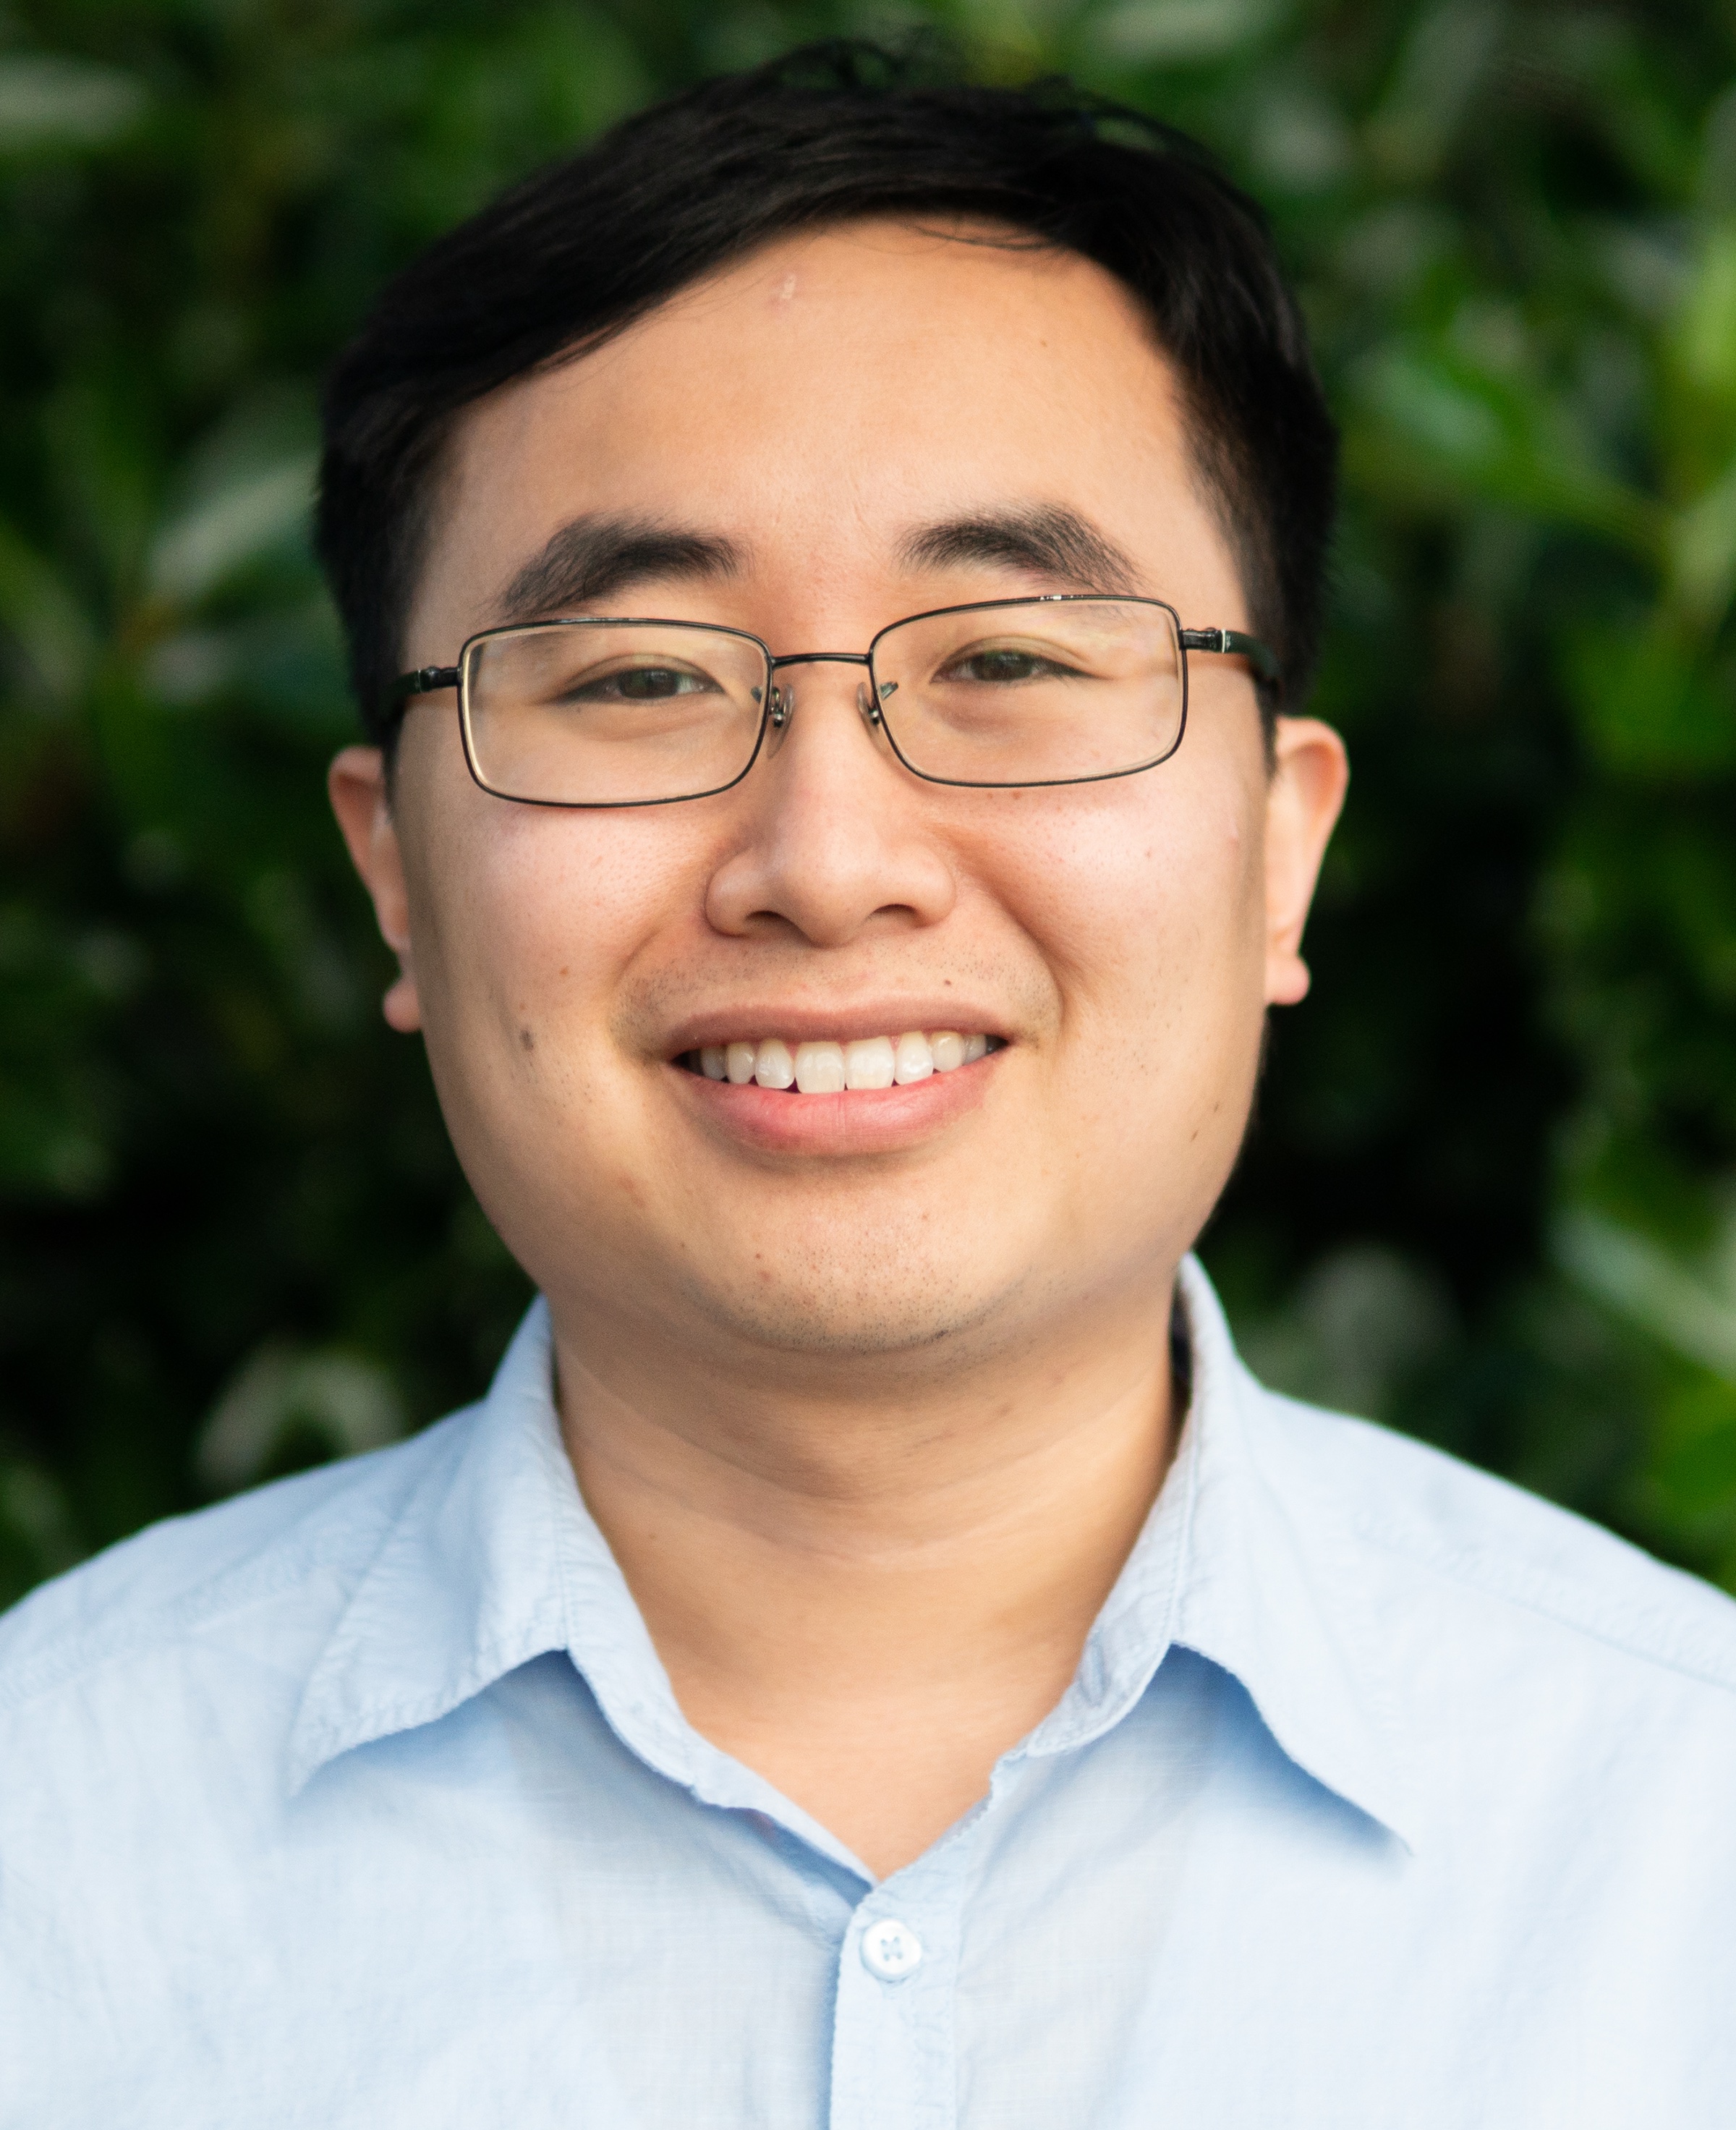 Trung Tran, Co-founder of Good Fills